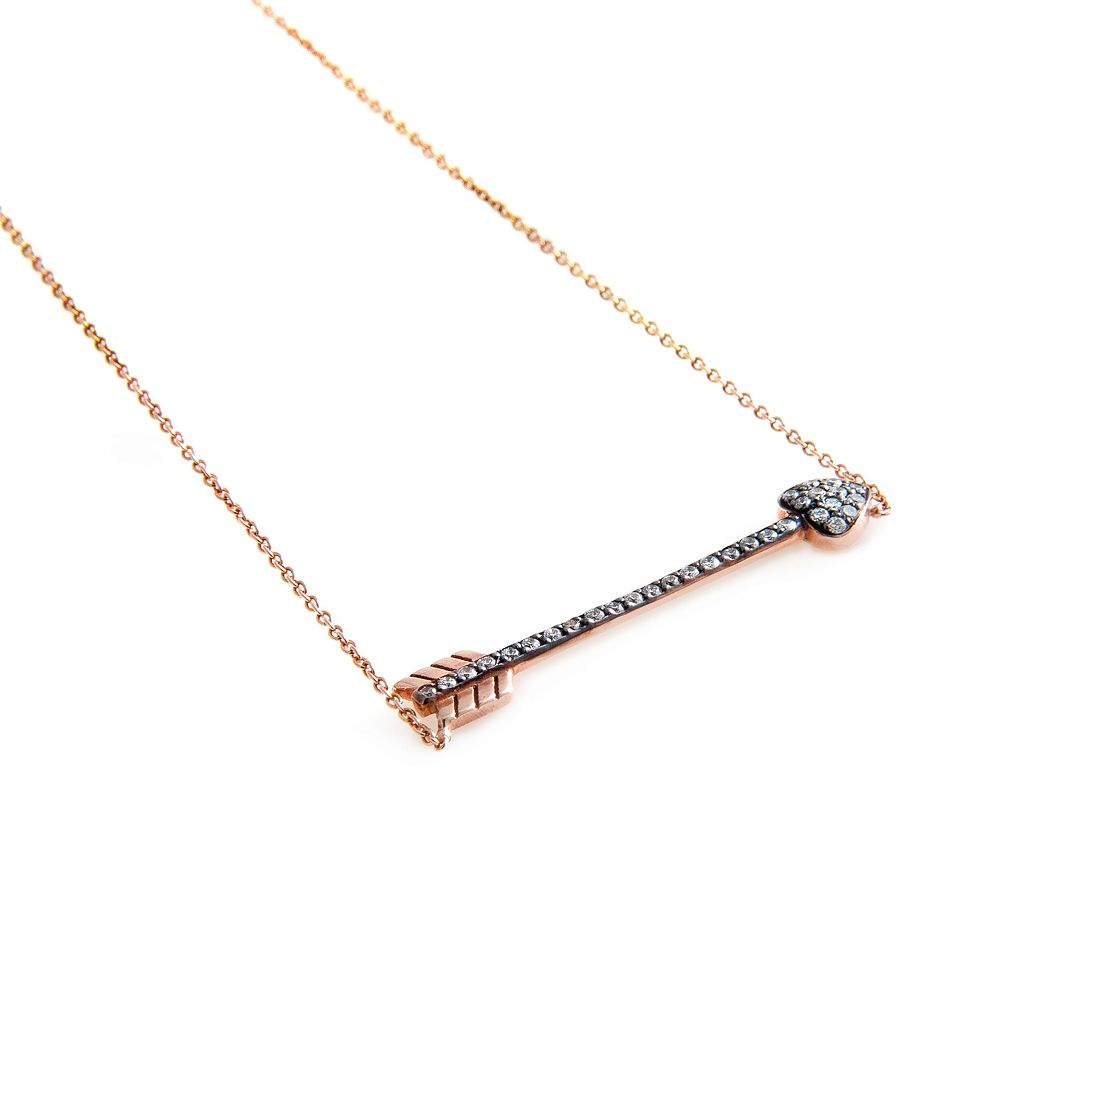 Rose gold arrow with black-gold detail and white brilliant cut diamonds, delicate rose gold chain.